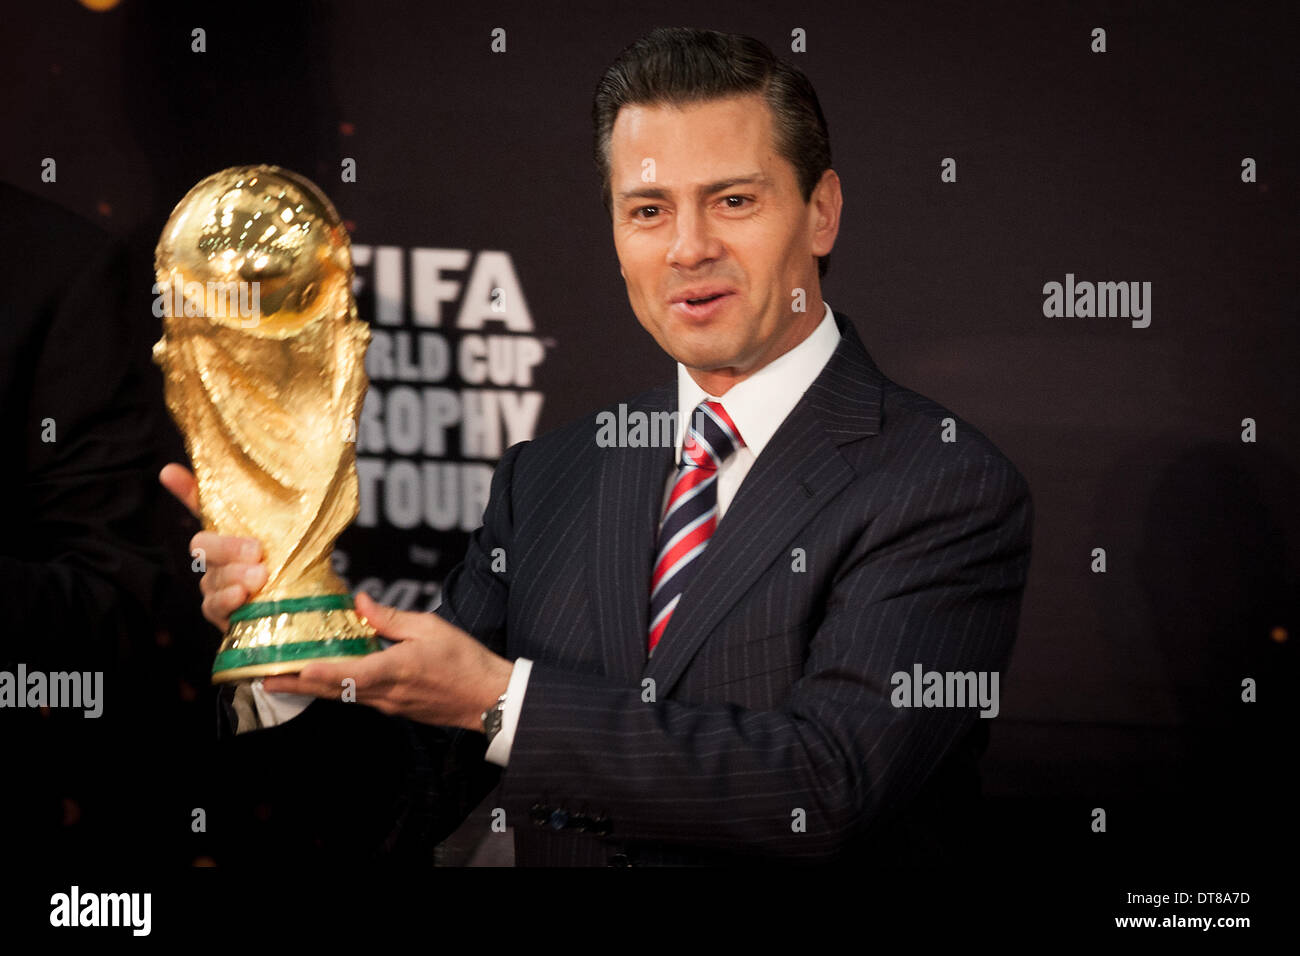 Mexico City, Mexico. 11th Feb, 2014. Mexican President Enrique Pena Nieto holds the FIFA World Cup trophy, during an event held at the official residence of Los Pinos, in Mexico City, capital of Mexico, on Feb. 11, 2014. © Pedro Mera/Xinhua/Alamy Live News Stock Photo